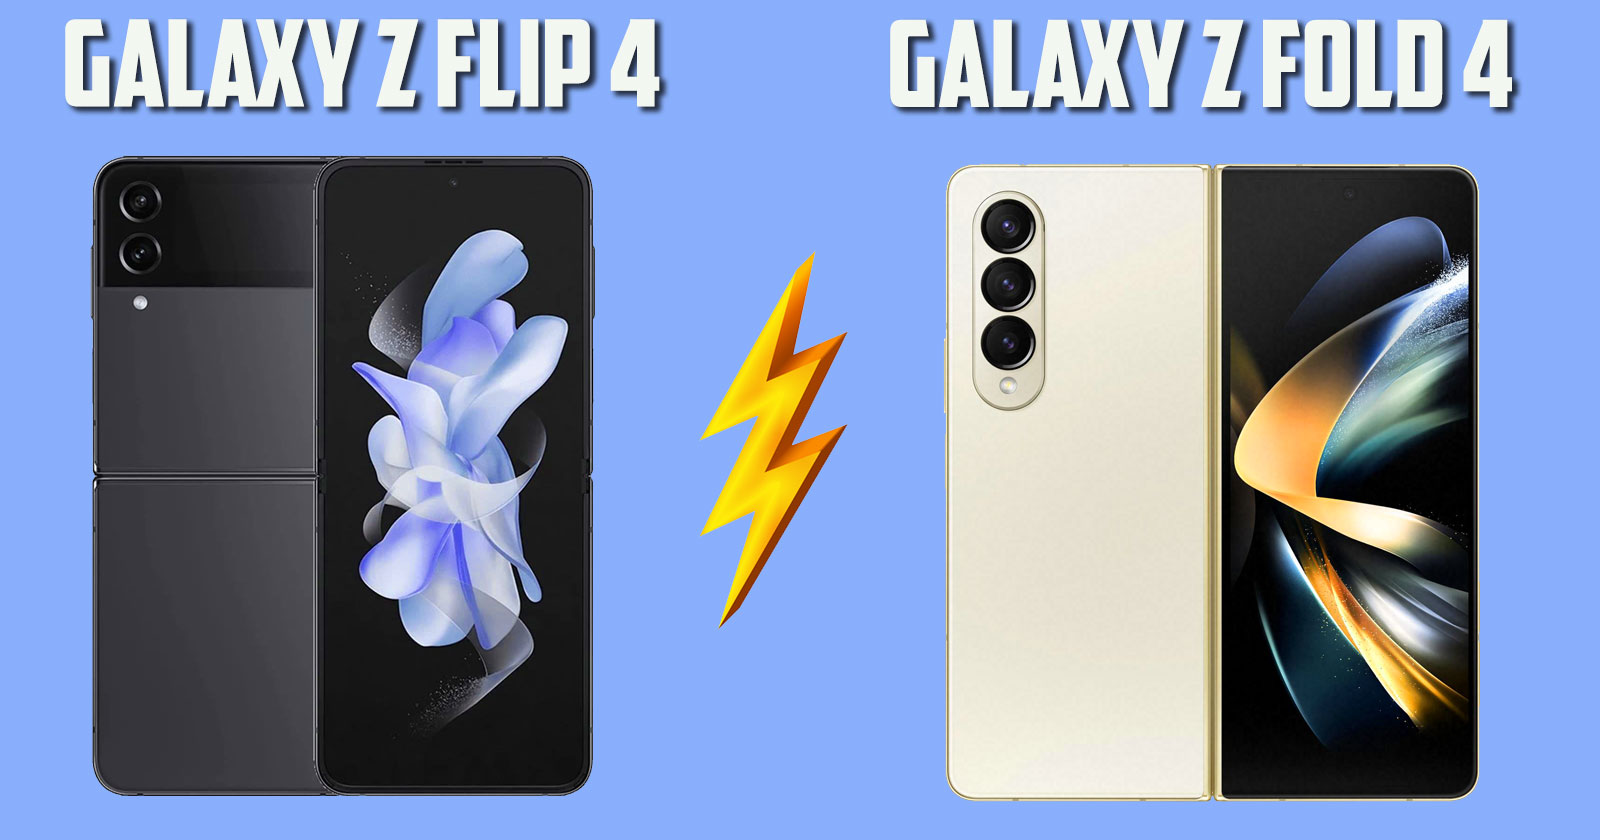 Difference Between Galaxy Z Flip 4 and Galaxy Z Fold 4